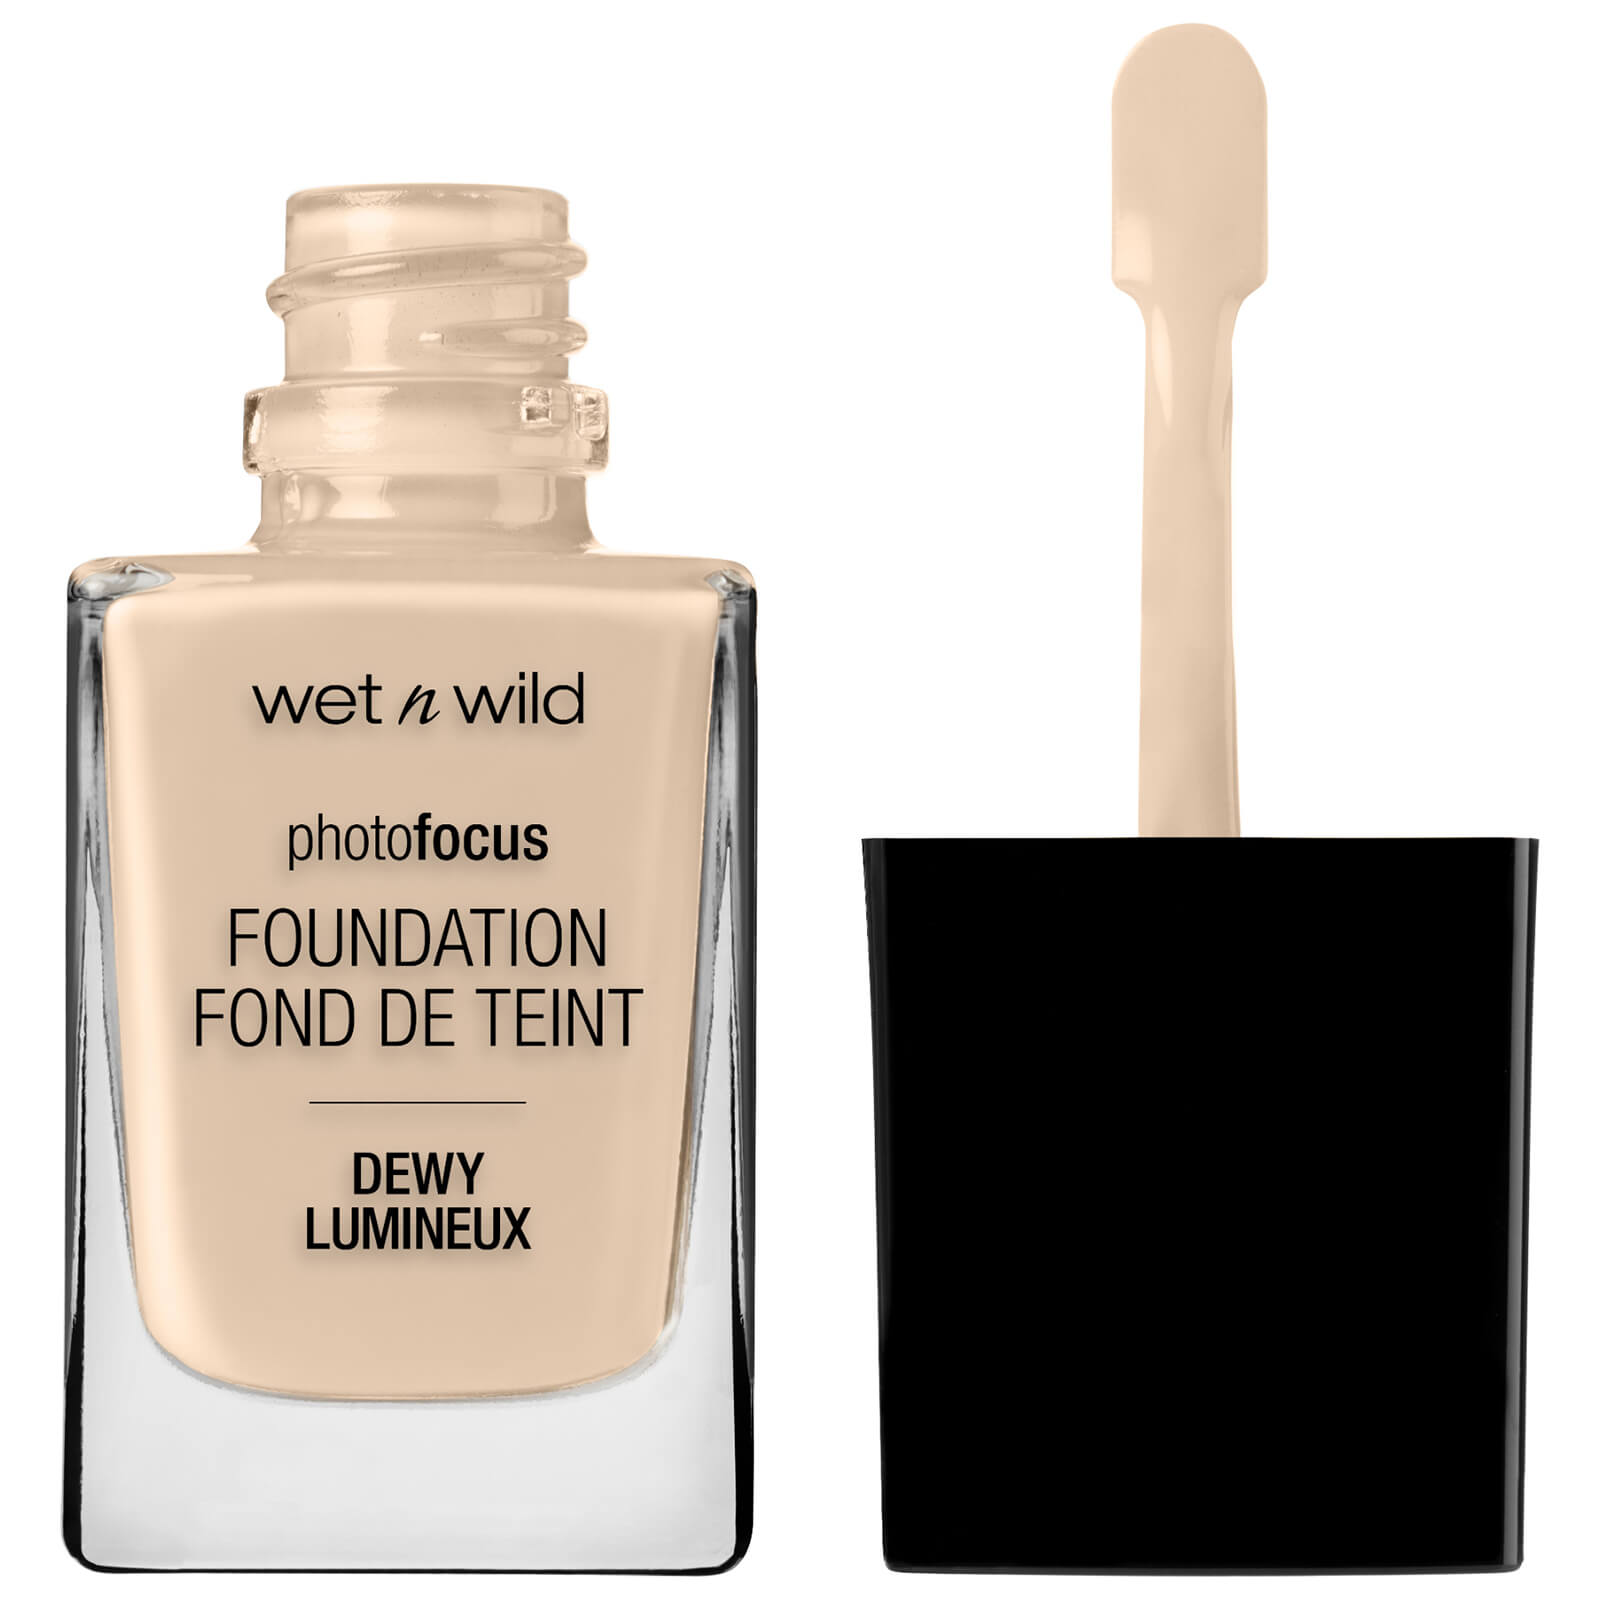 wet n wild Photo Focus Dewy Foundation (Various Shades) - Nude Ivory